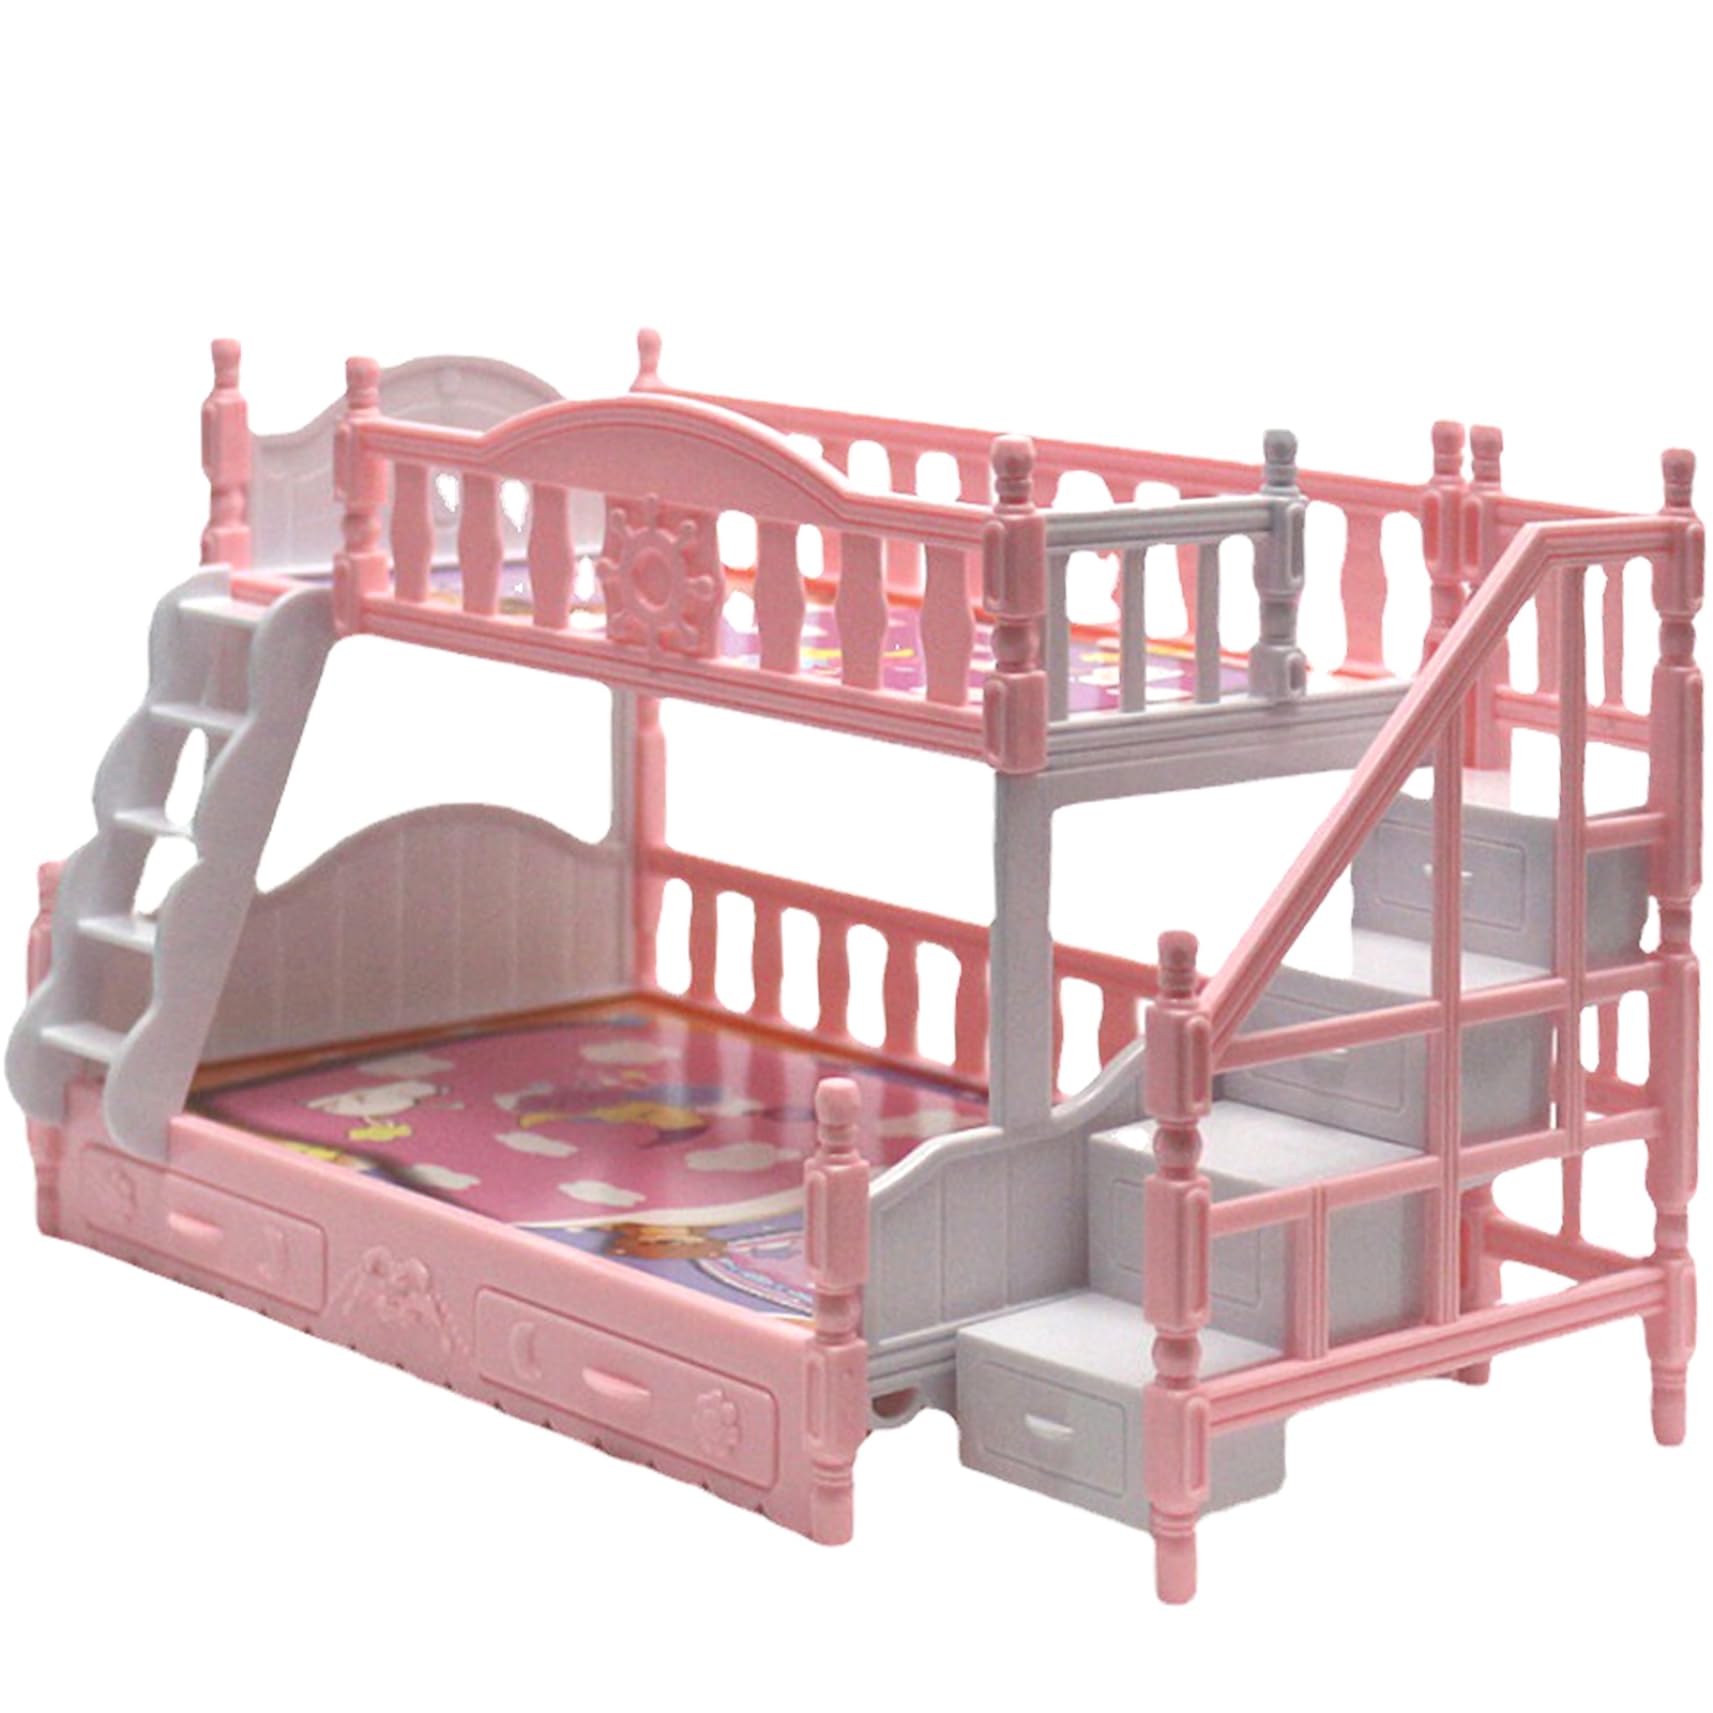 Baby Doll Bunk Bed for Girls Baby Doll Cot Miniature Simulation Cute Cartoon Dollhouse Bed with Stairs Plastic Dollhouse Furniture Birthday Gift